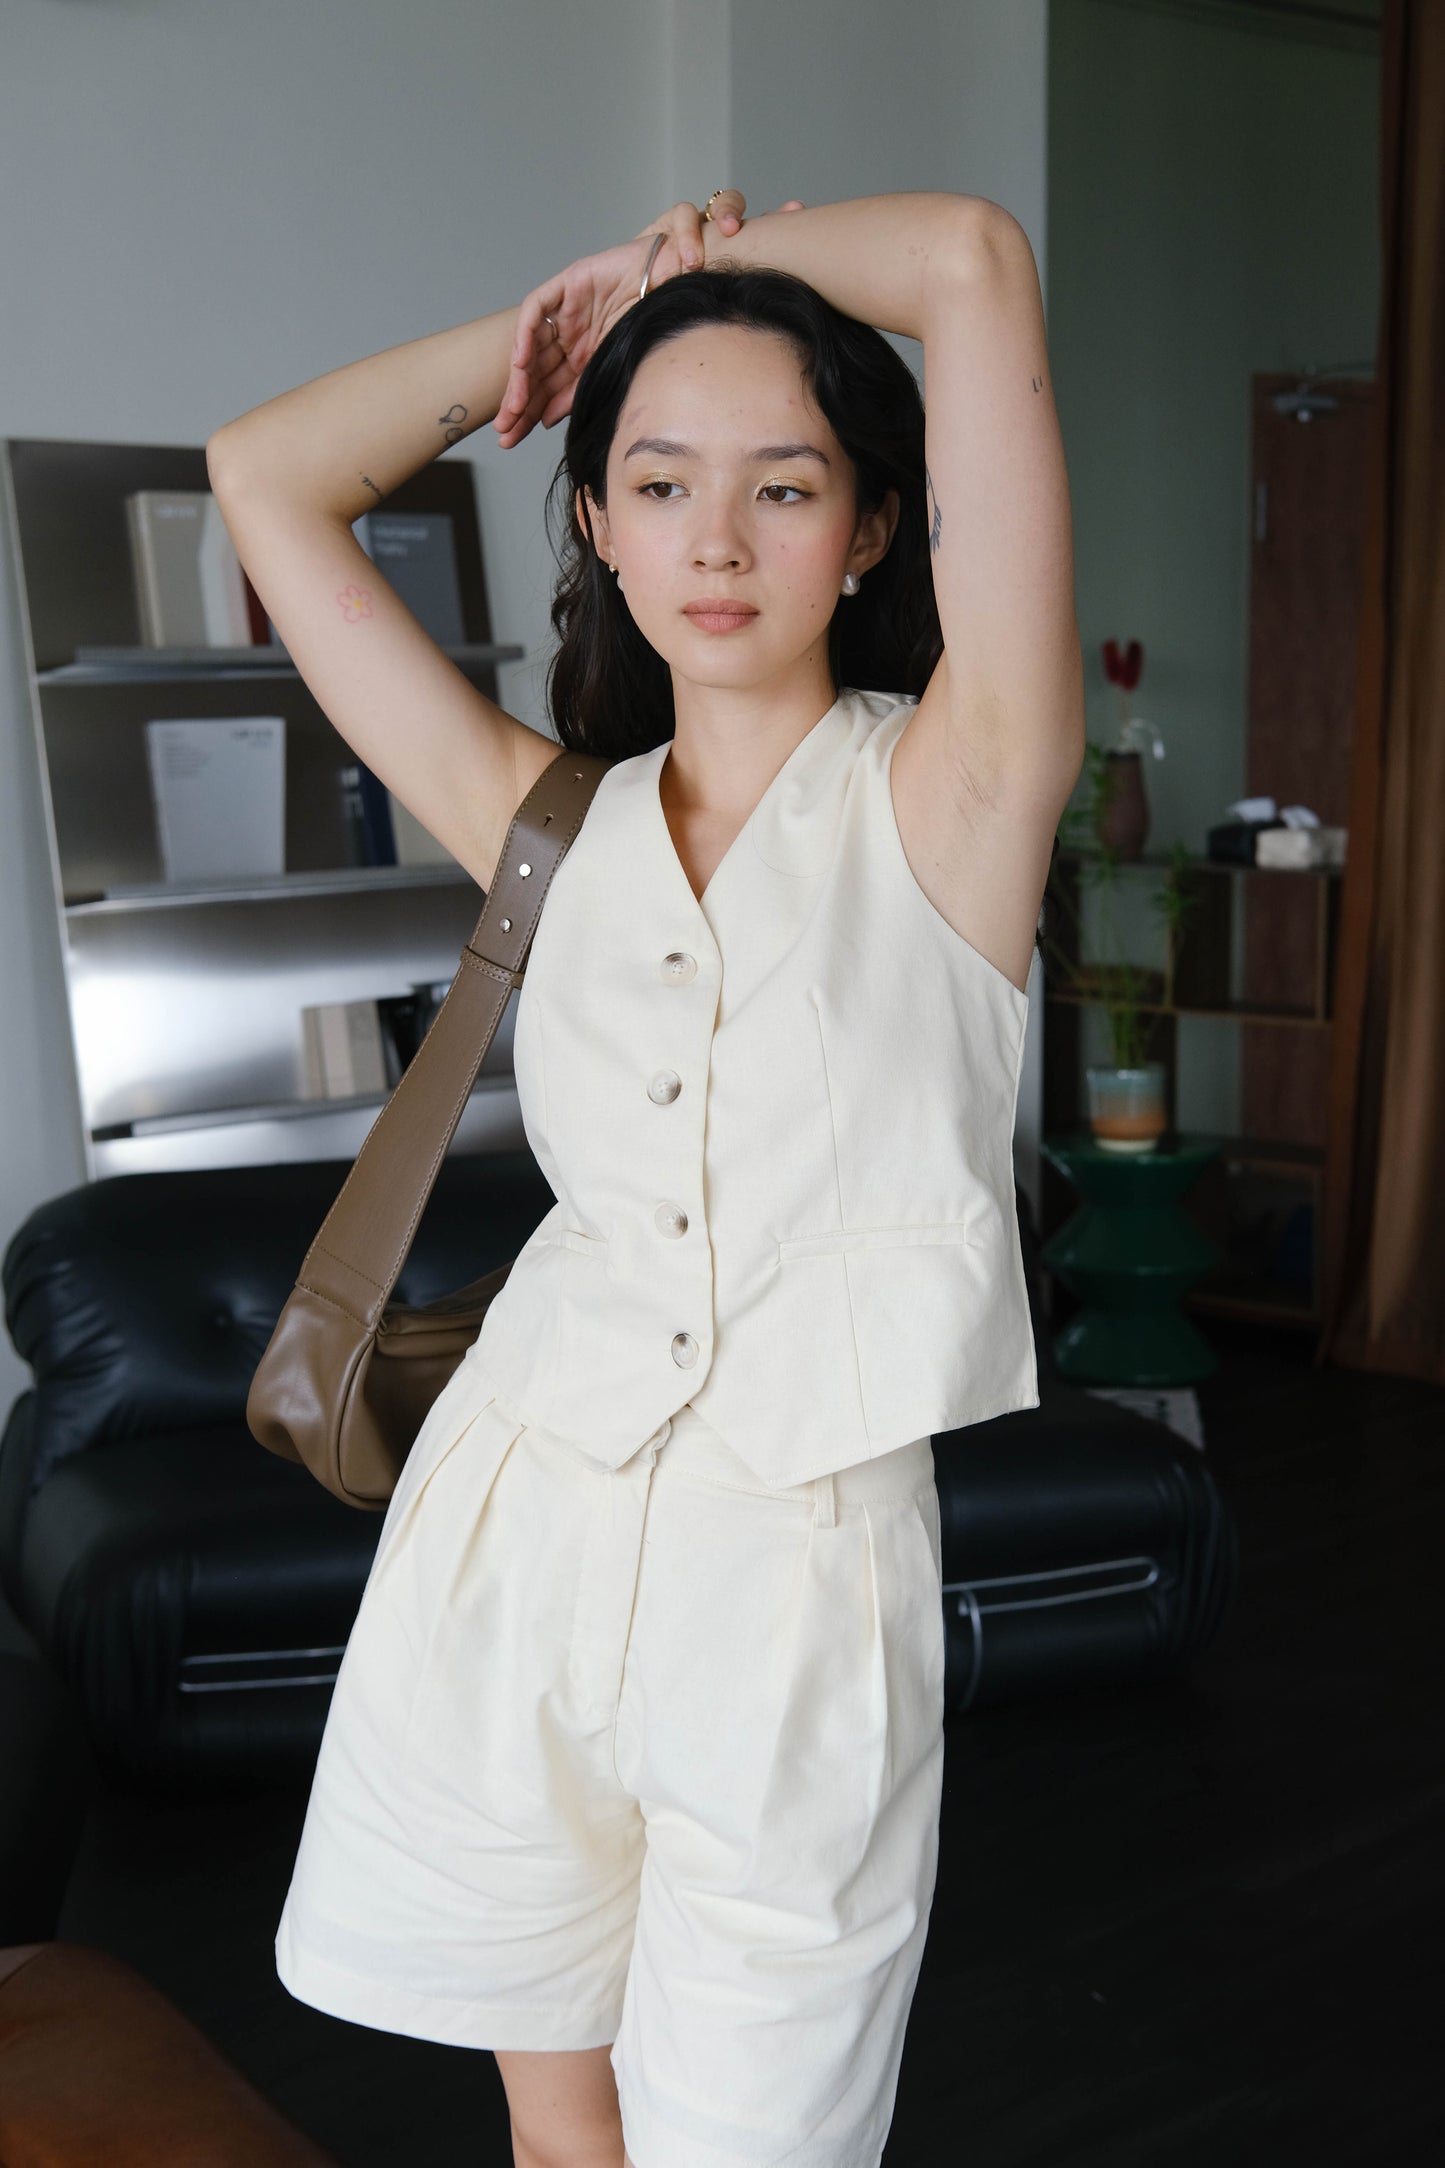 French cotton top + Linen sleeveless vest short pants in cream white suit